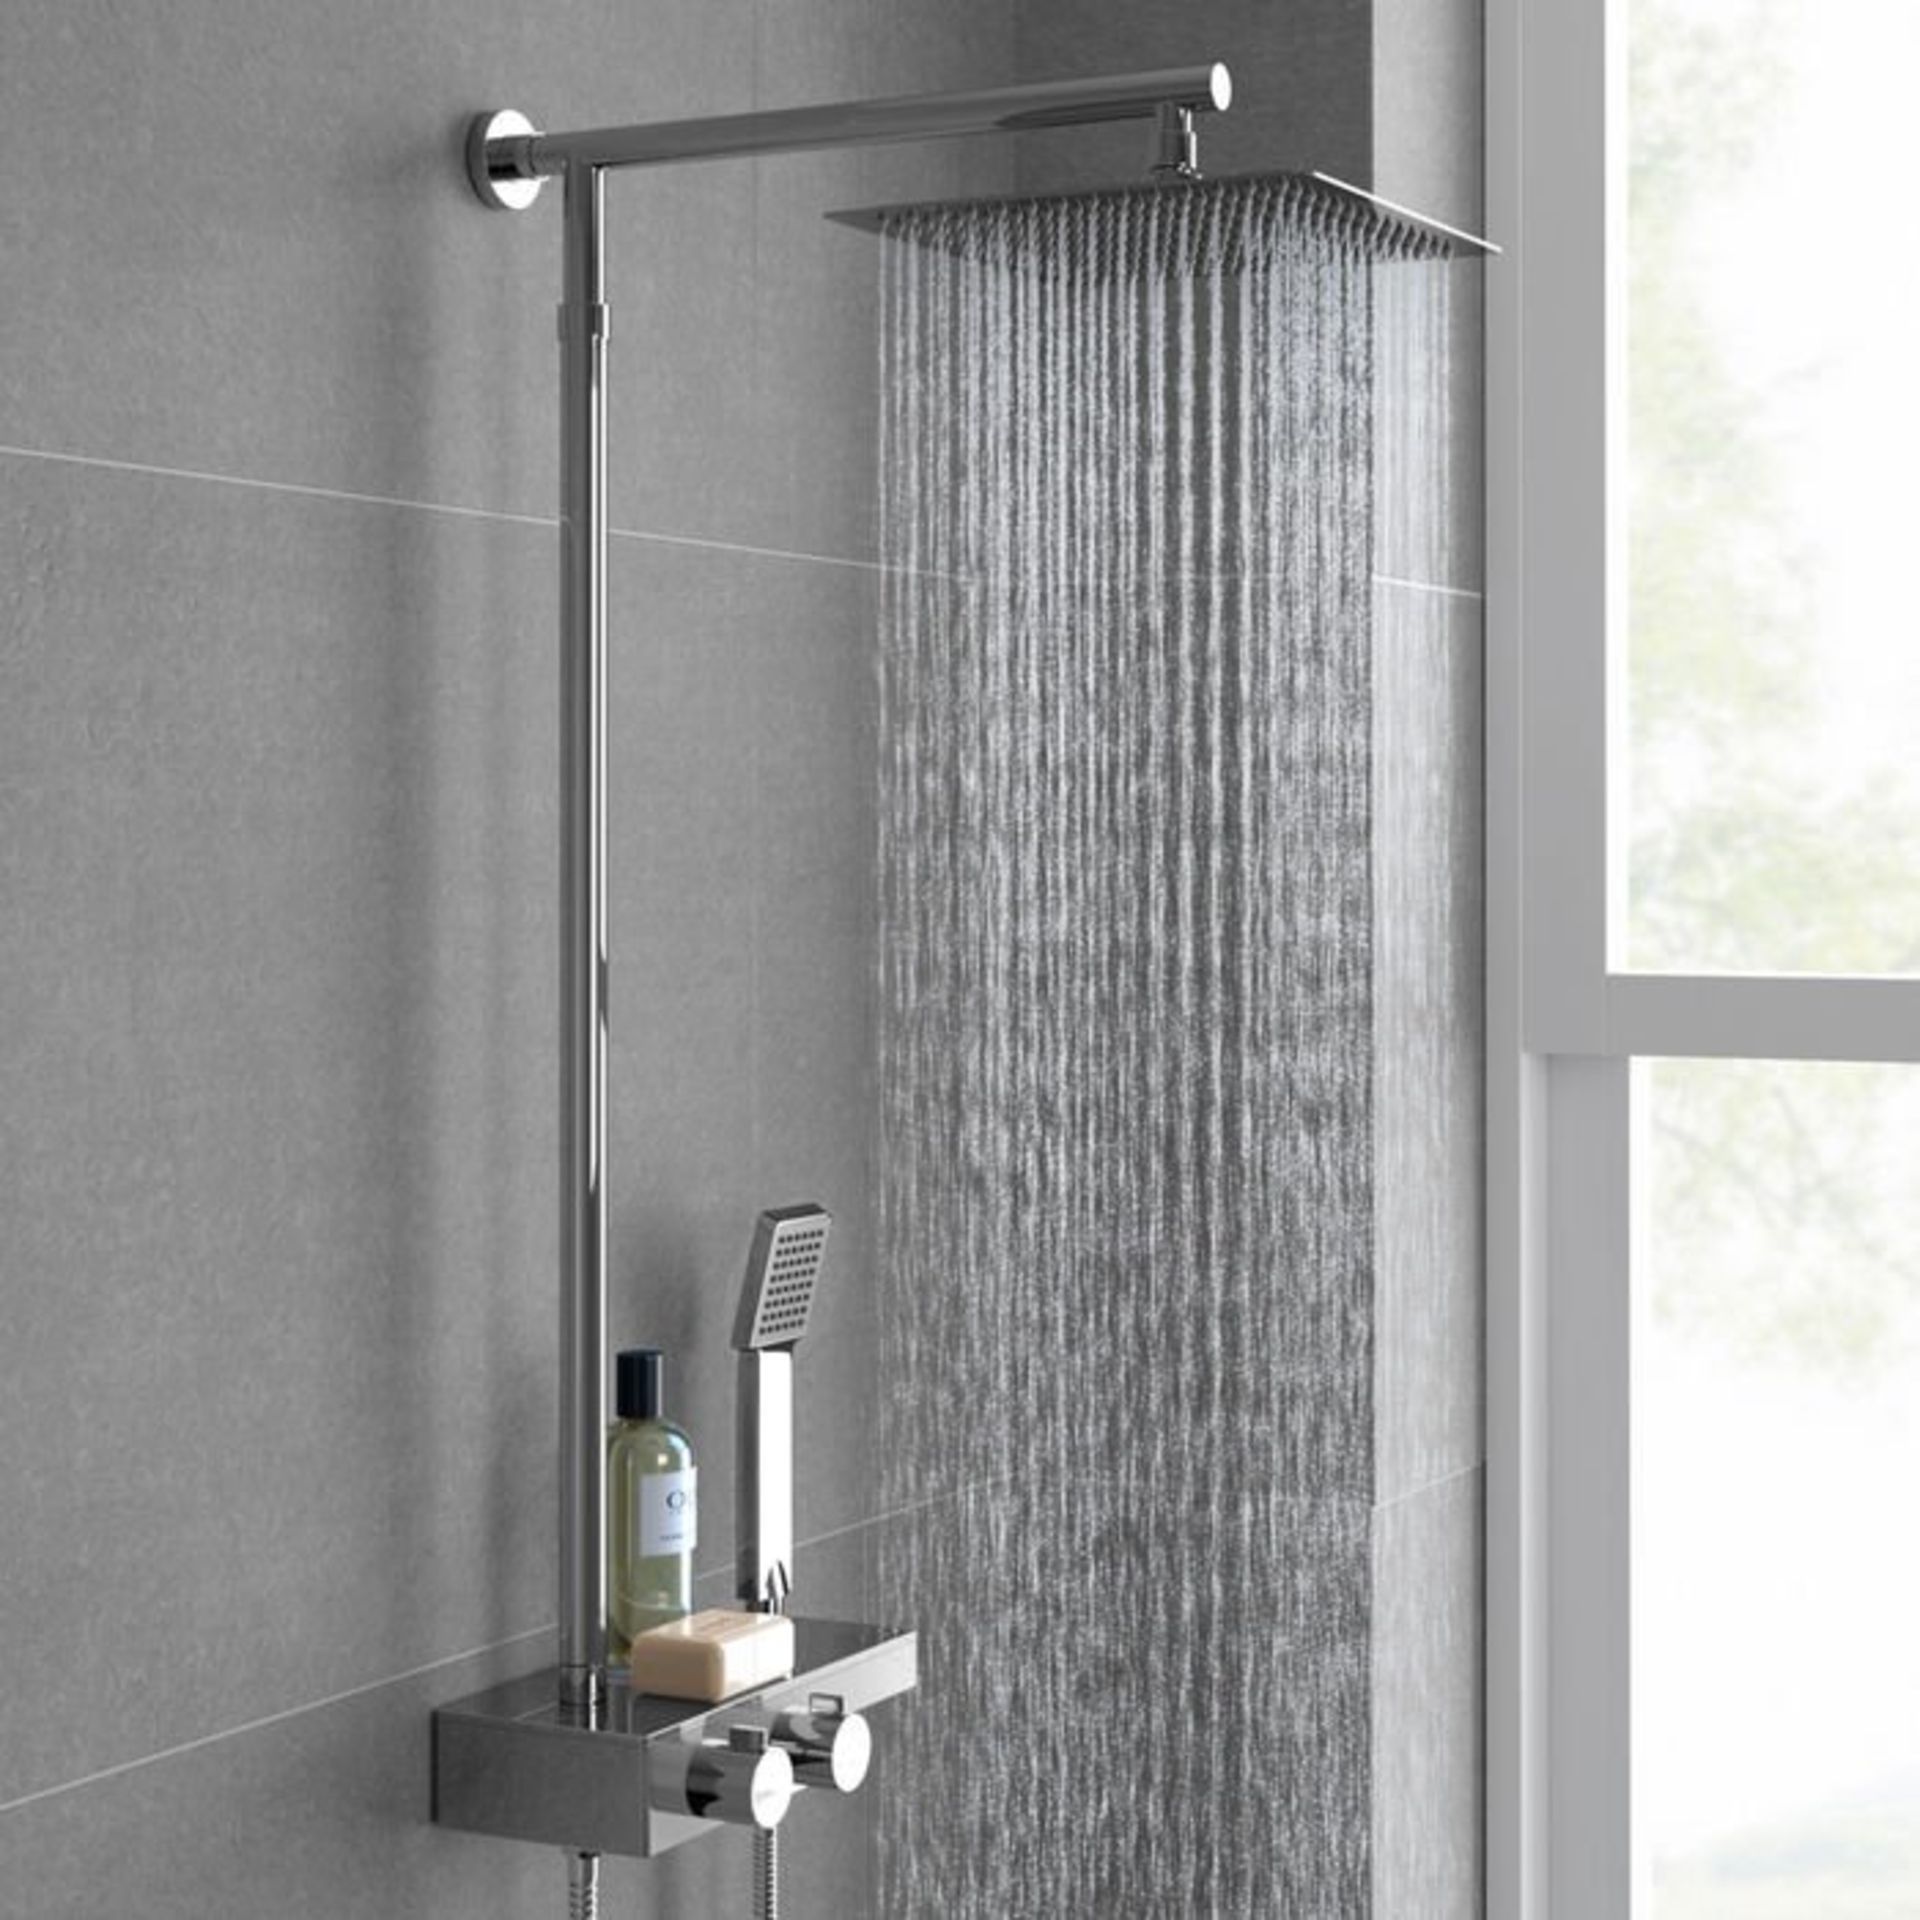 (L29) Thermostatic Exposed Shower Kit 250mm Square Head Handheld., We love this because it creates a - Image 2 of 3